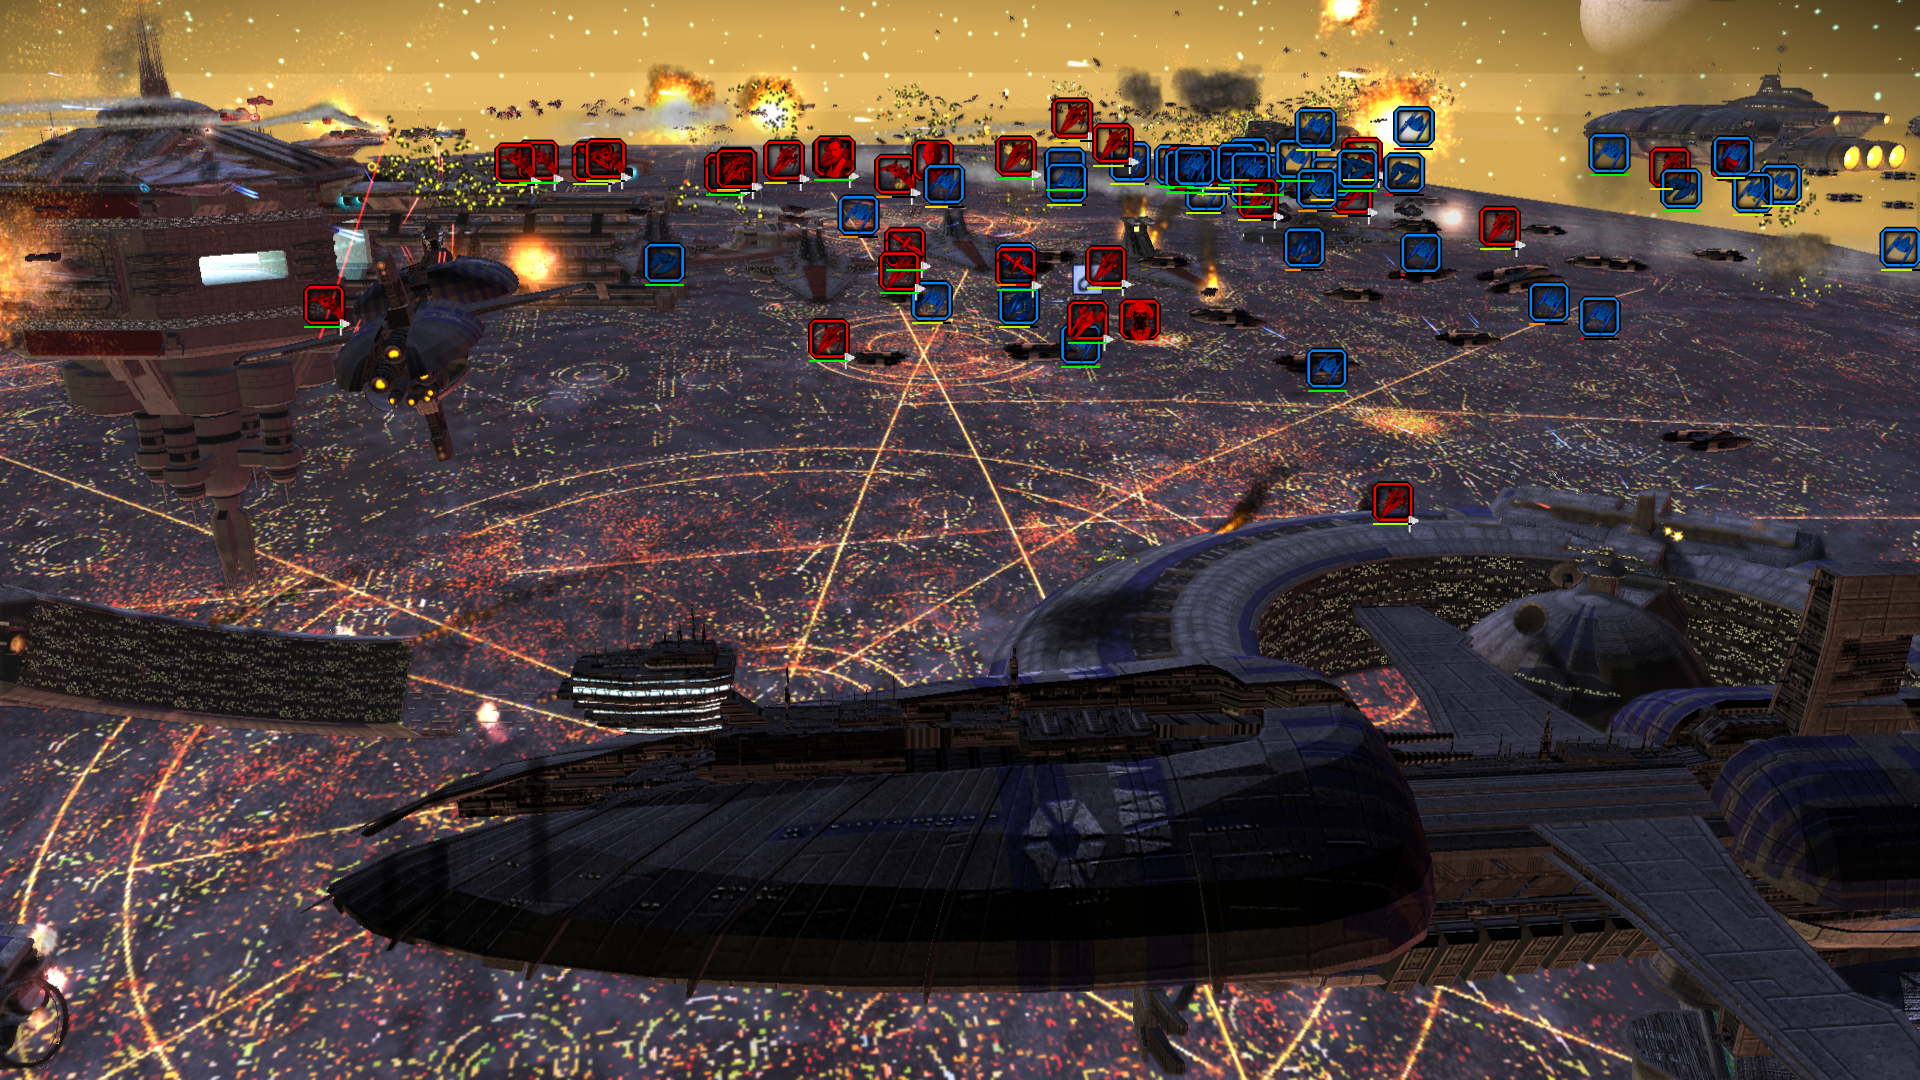 Battle over Coruscant image at War mod for Star Wars: Empire at War: Forces of Corruption